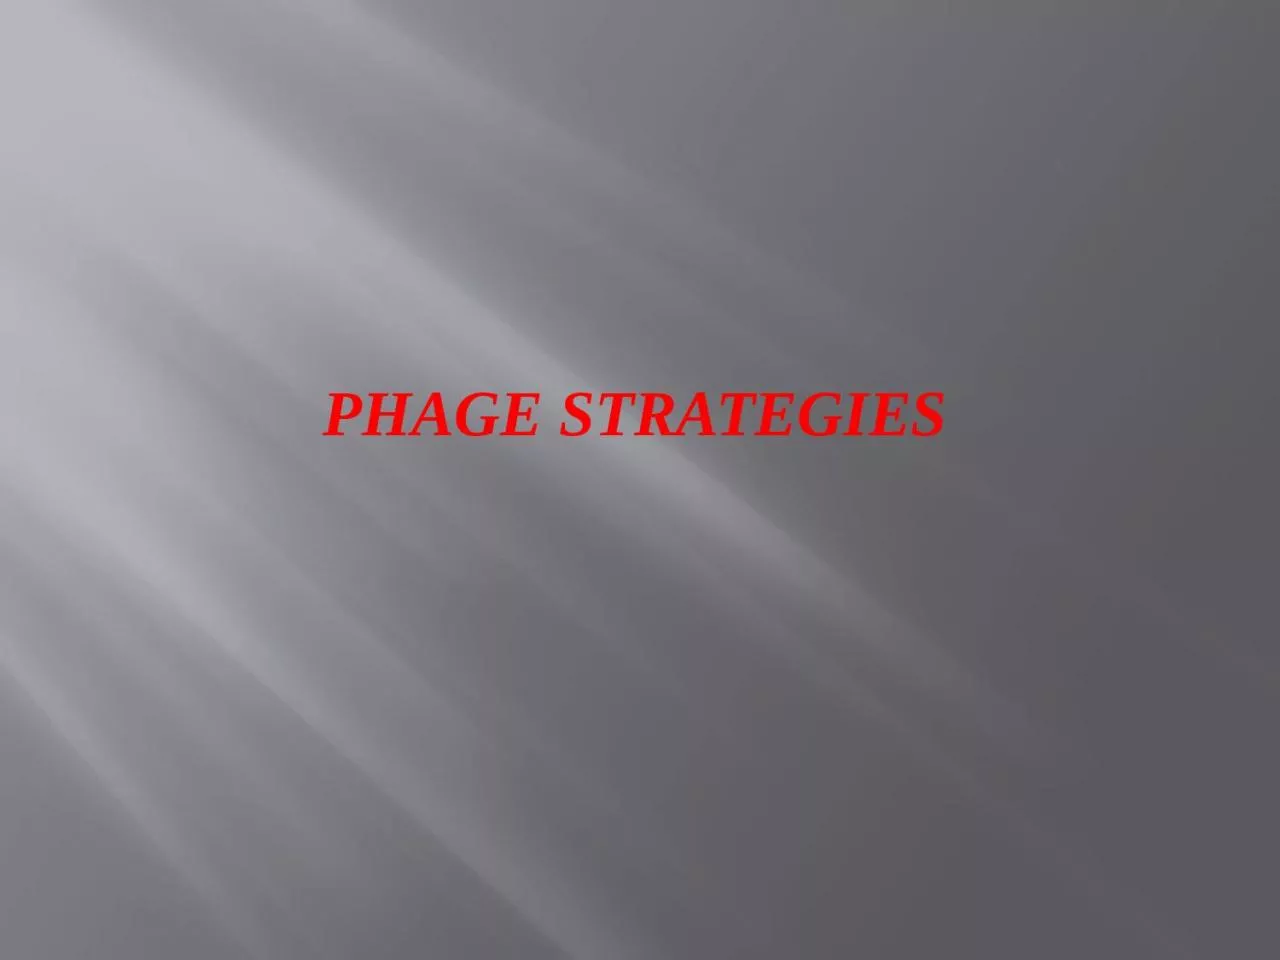 Phage Strategies Some phages have only a single strategy for survival on infecting a susceptible